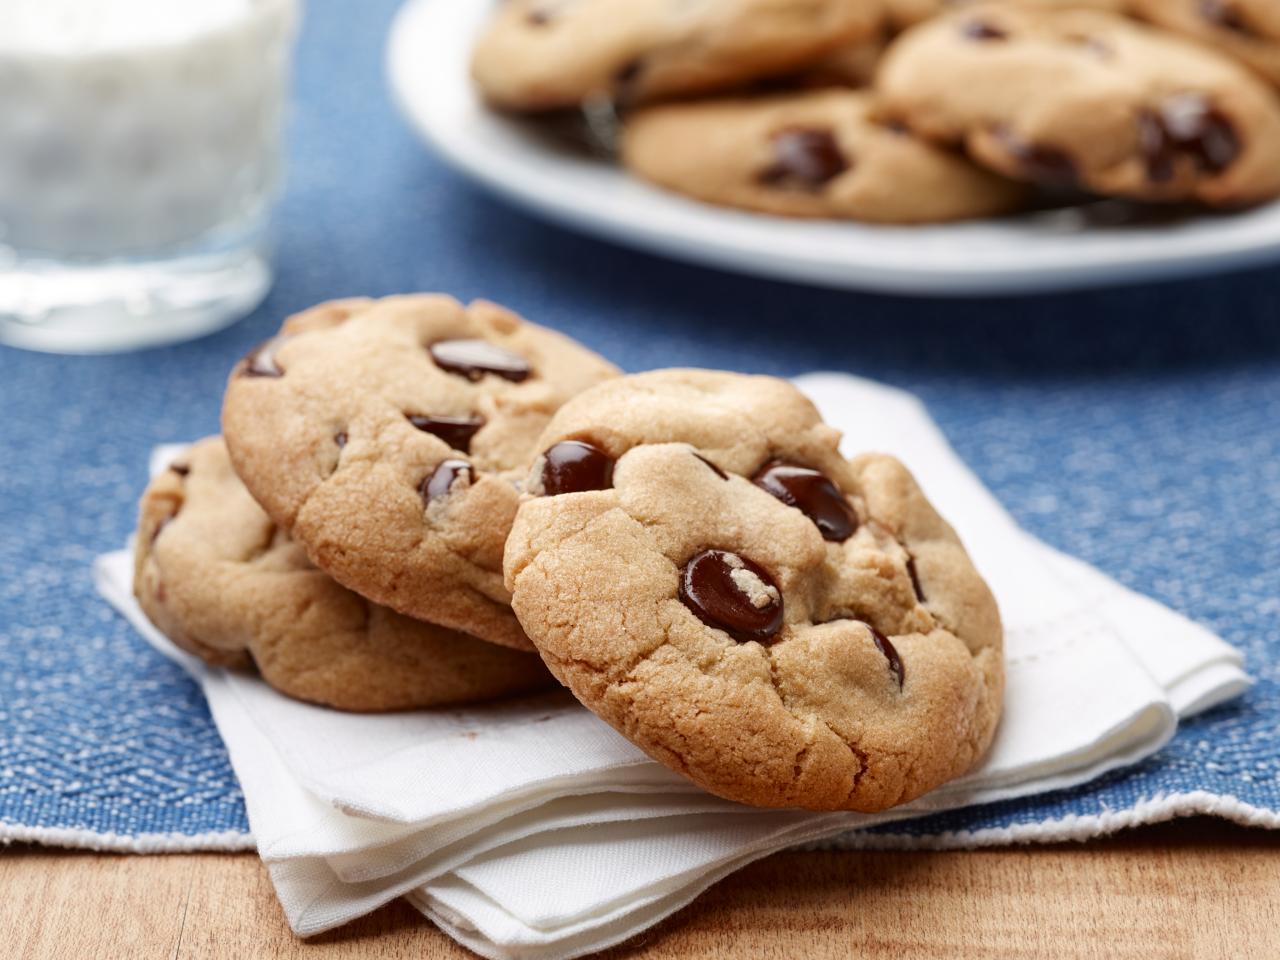 7 Steps to Baking Cookies : Food Network, Easy Baking Tips and Recipes:  Cookies, Breads & Pastries : Food Network